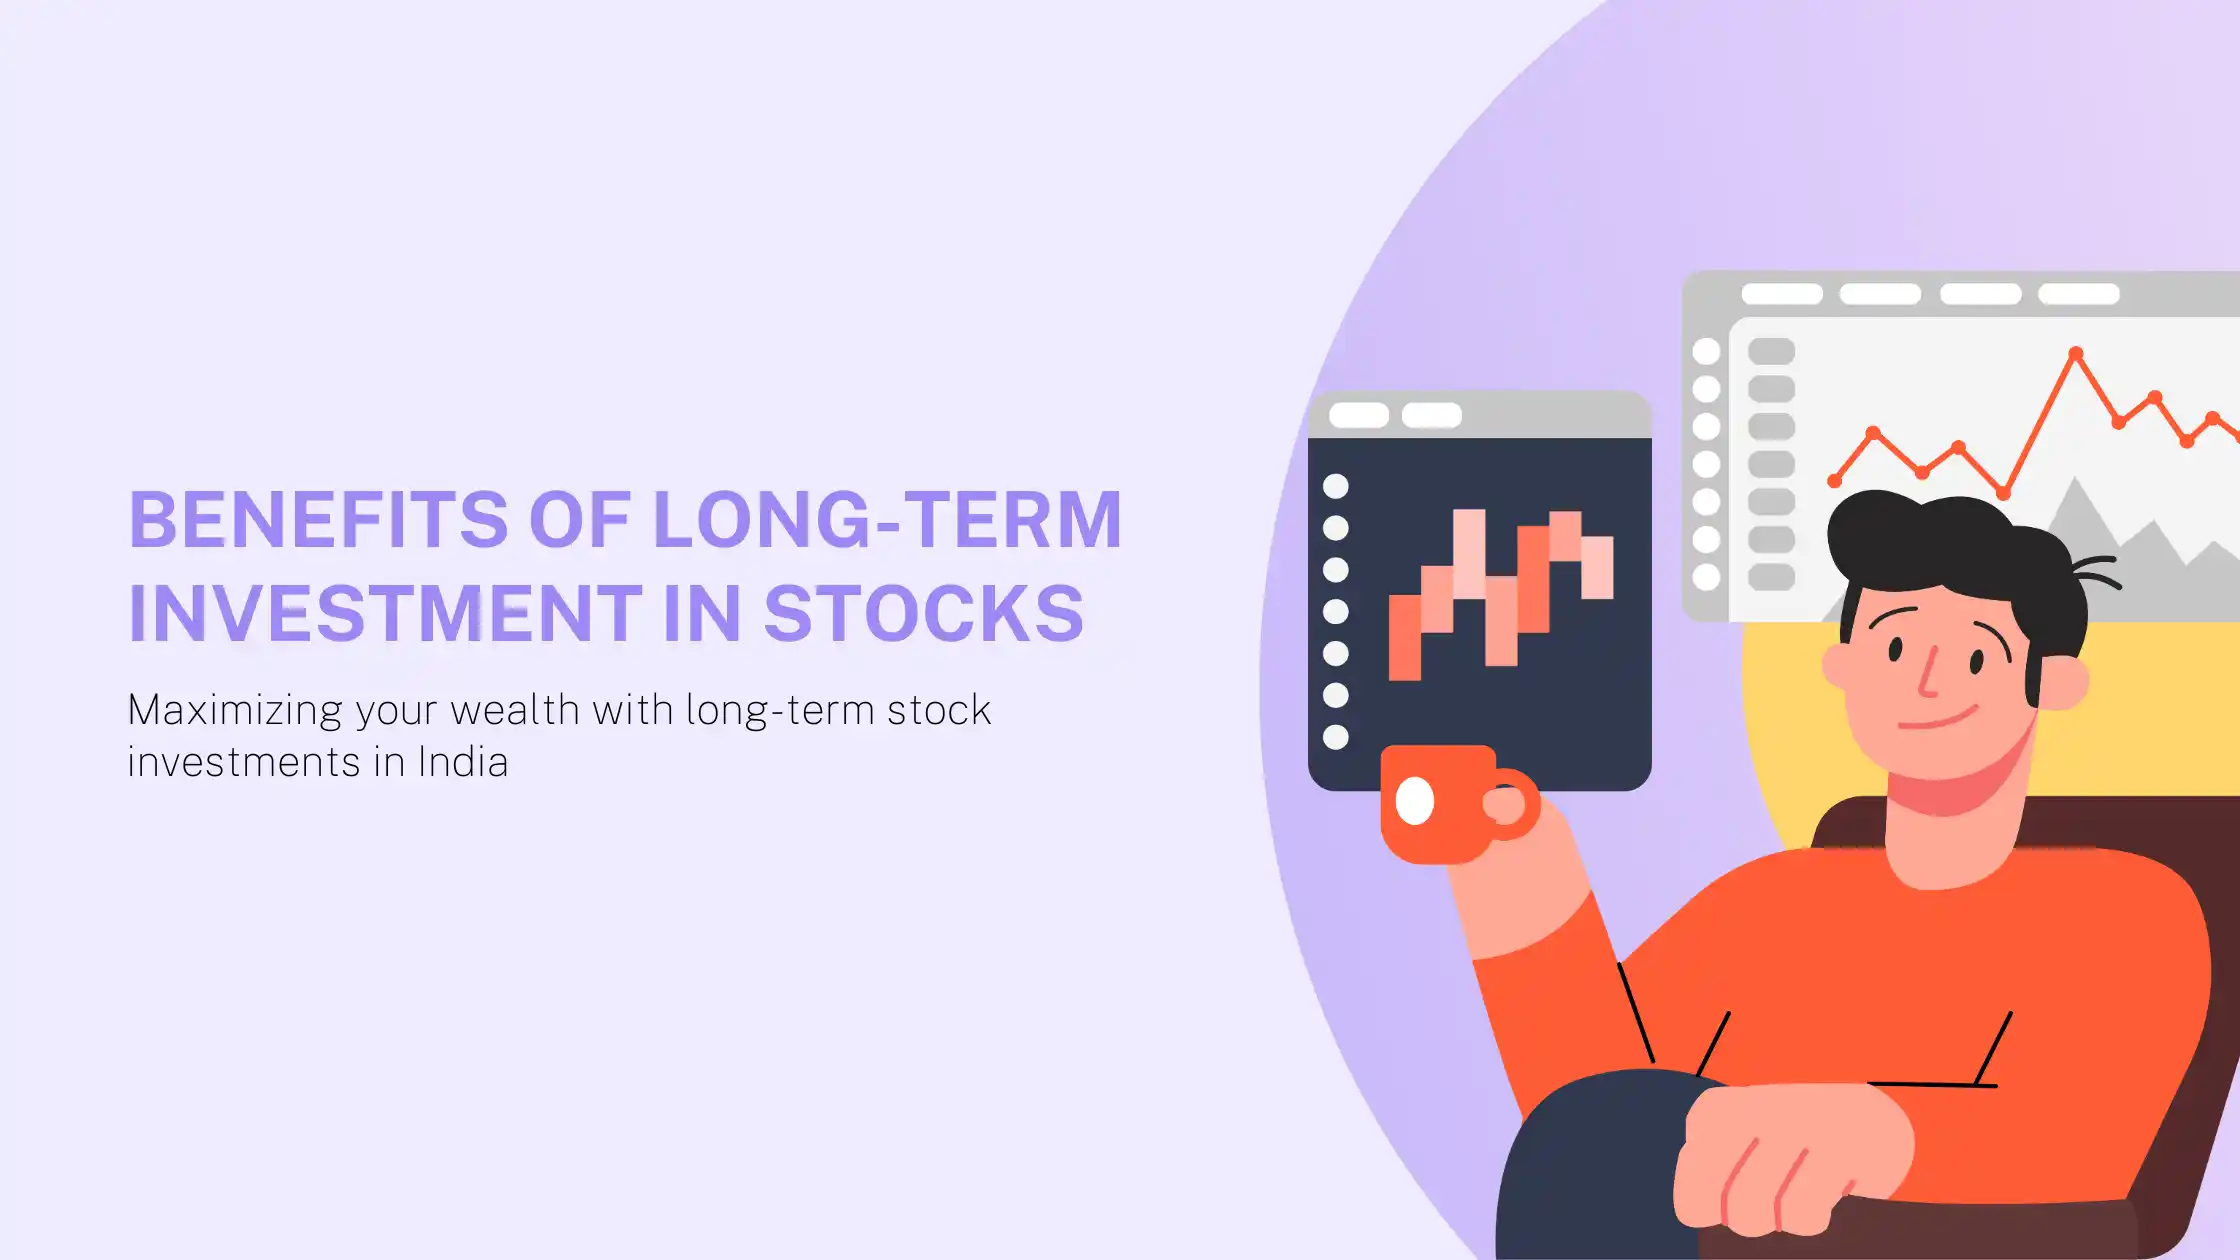 Benefits of Long-Term Investment in Stocks